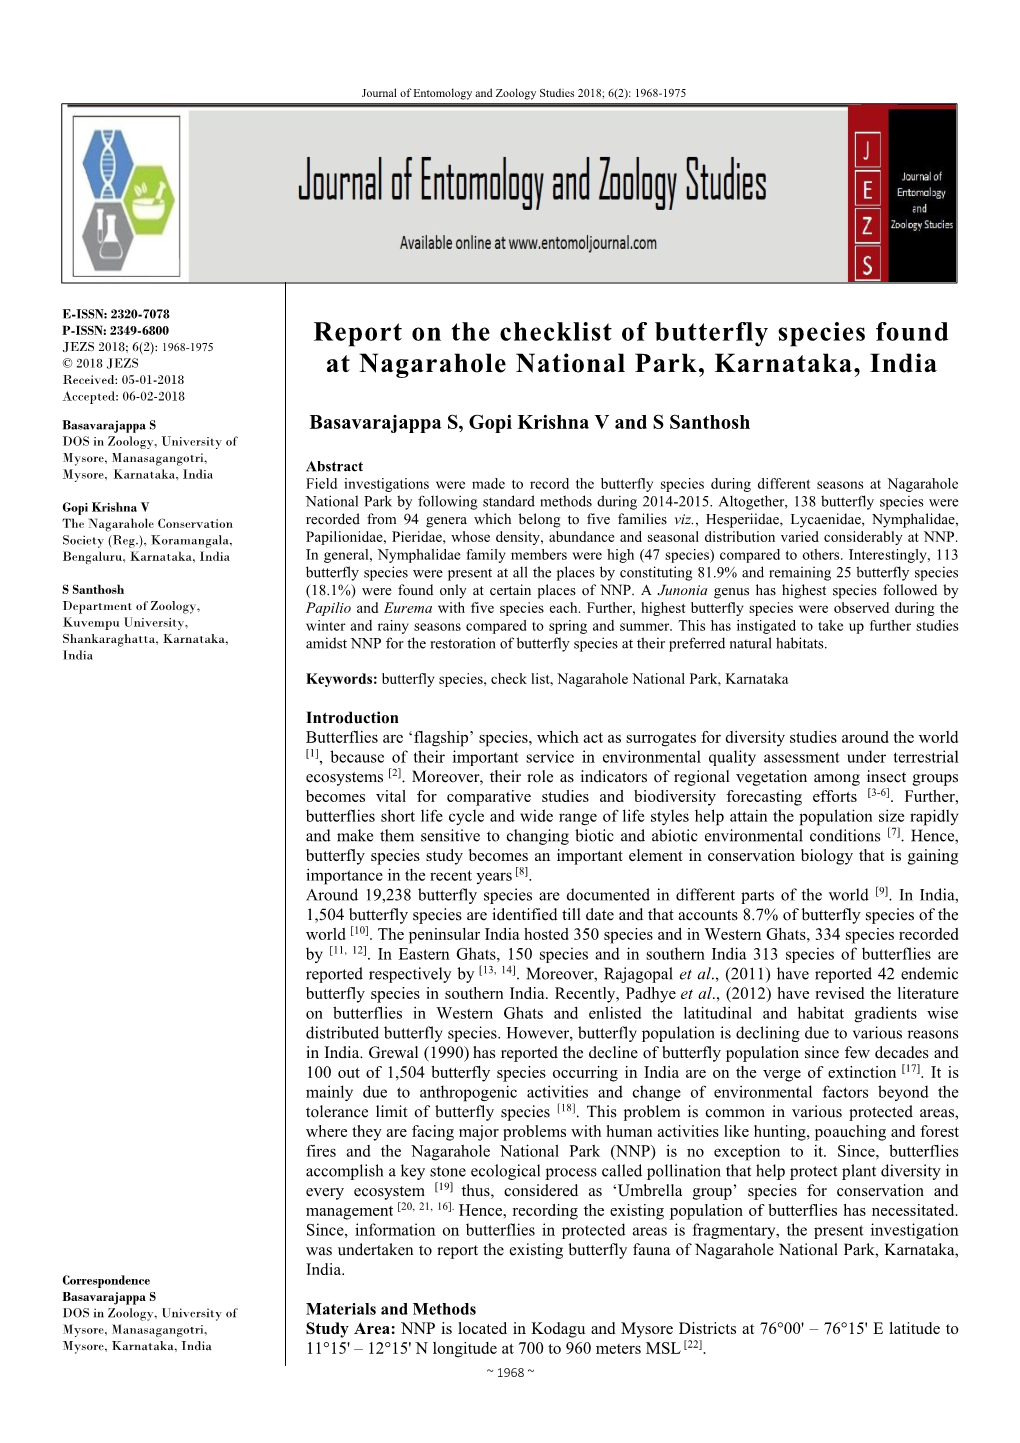 Report on the Checklist of Butterfly Species Found at Nagarahole National Park, Karnataka, India